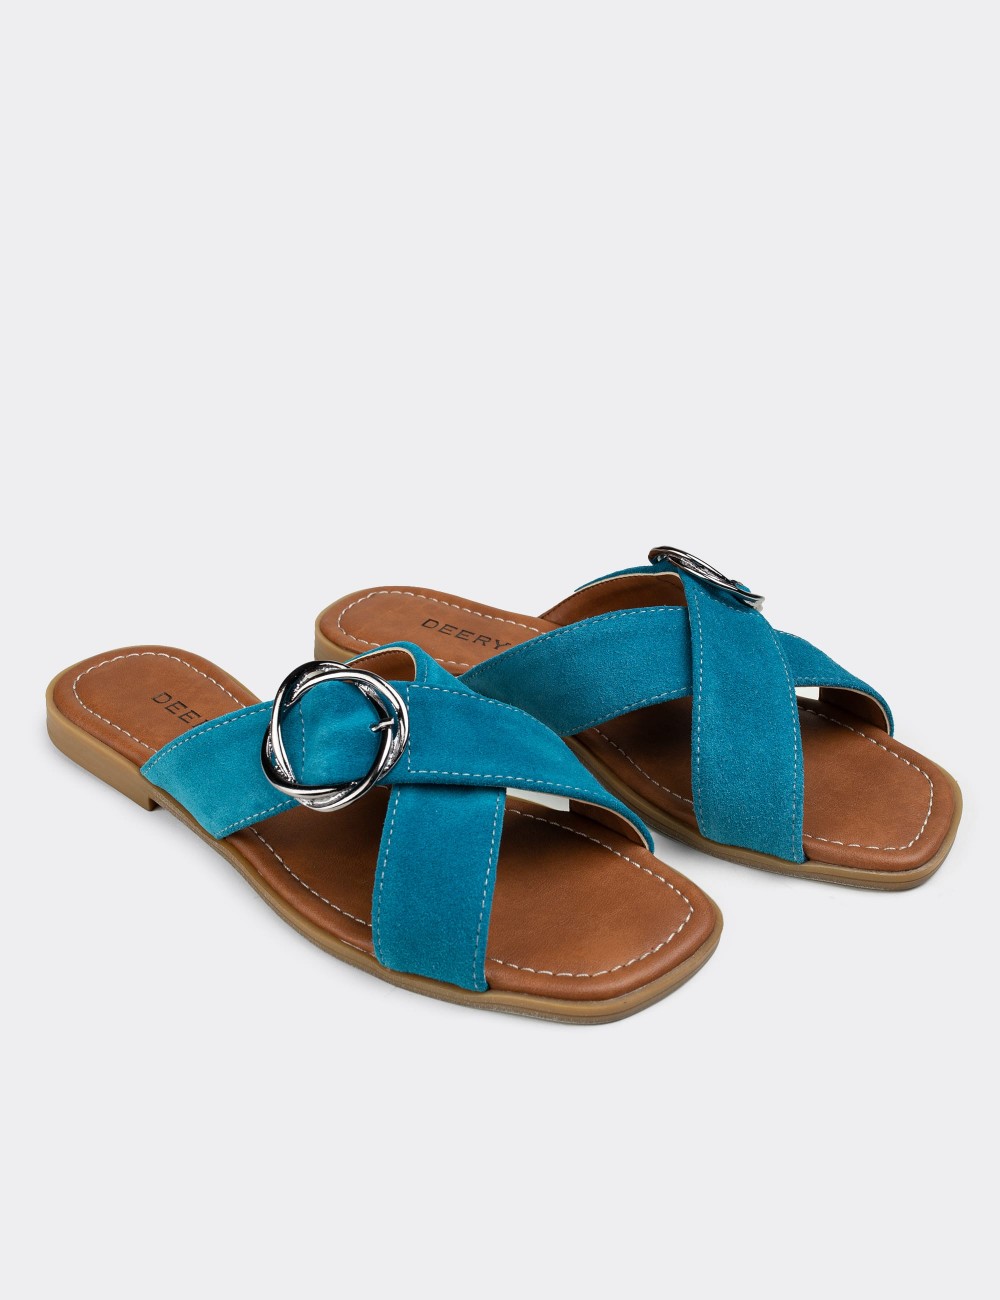 Blue Suede Leather Sandals - E2136ZMVIC01